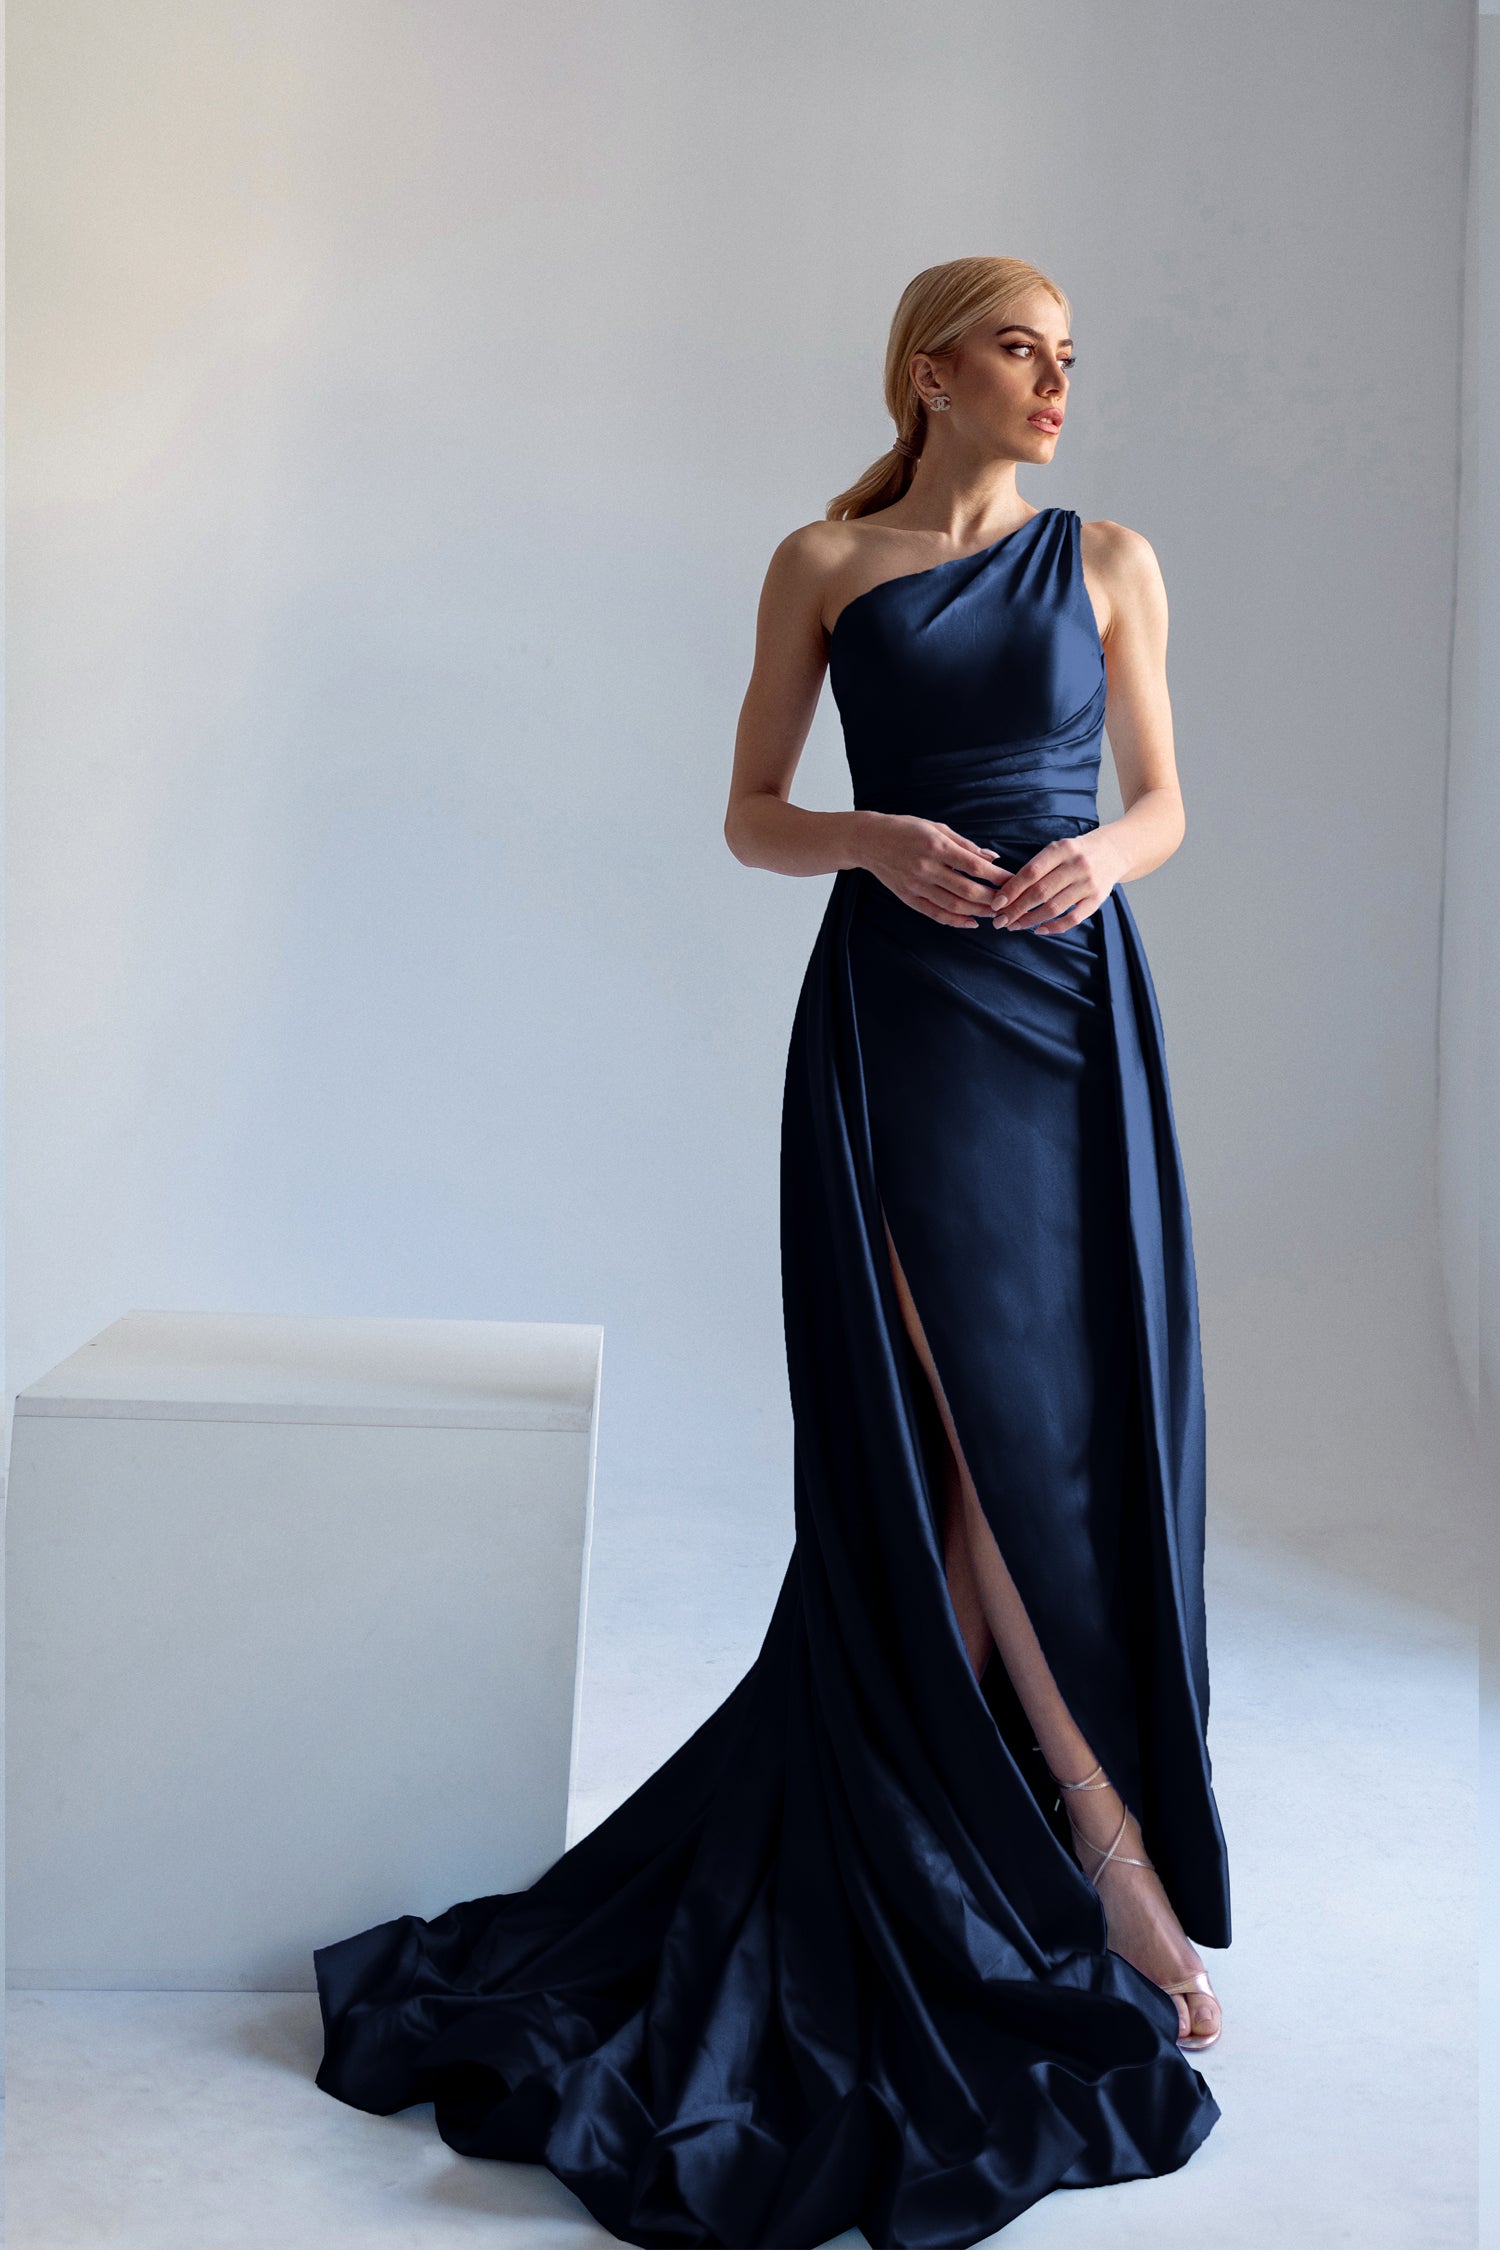 Tina Holly Couture TK888 Navy Silk Satin Asymmetrical Neck Line With A Ruched Side And High Leg Spilt Formal Dress